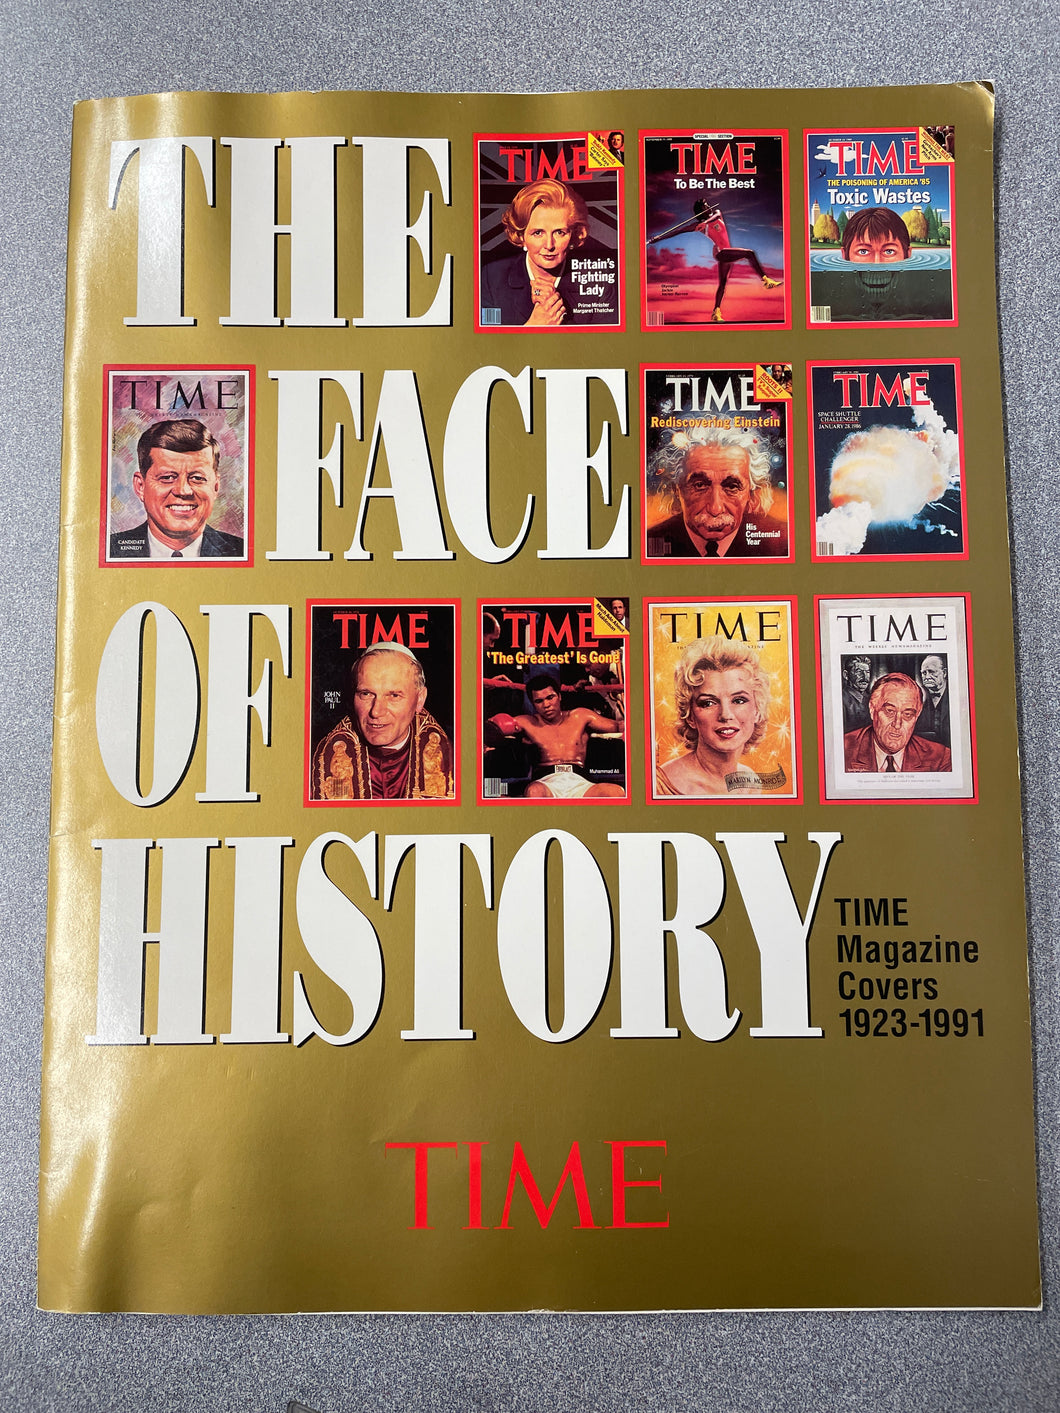 H  The Face of History: Time Magazine Covers 1923-1991, Muller, Henry, ed. [1992] N 3/24